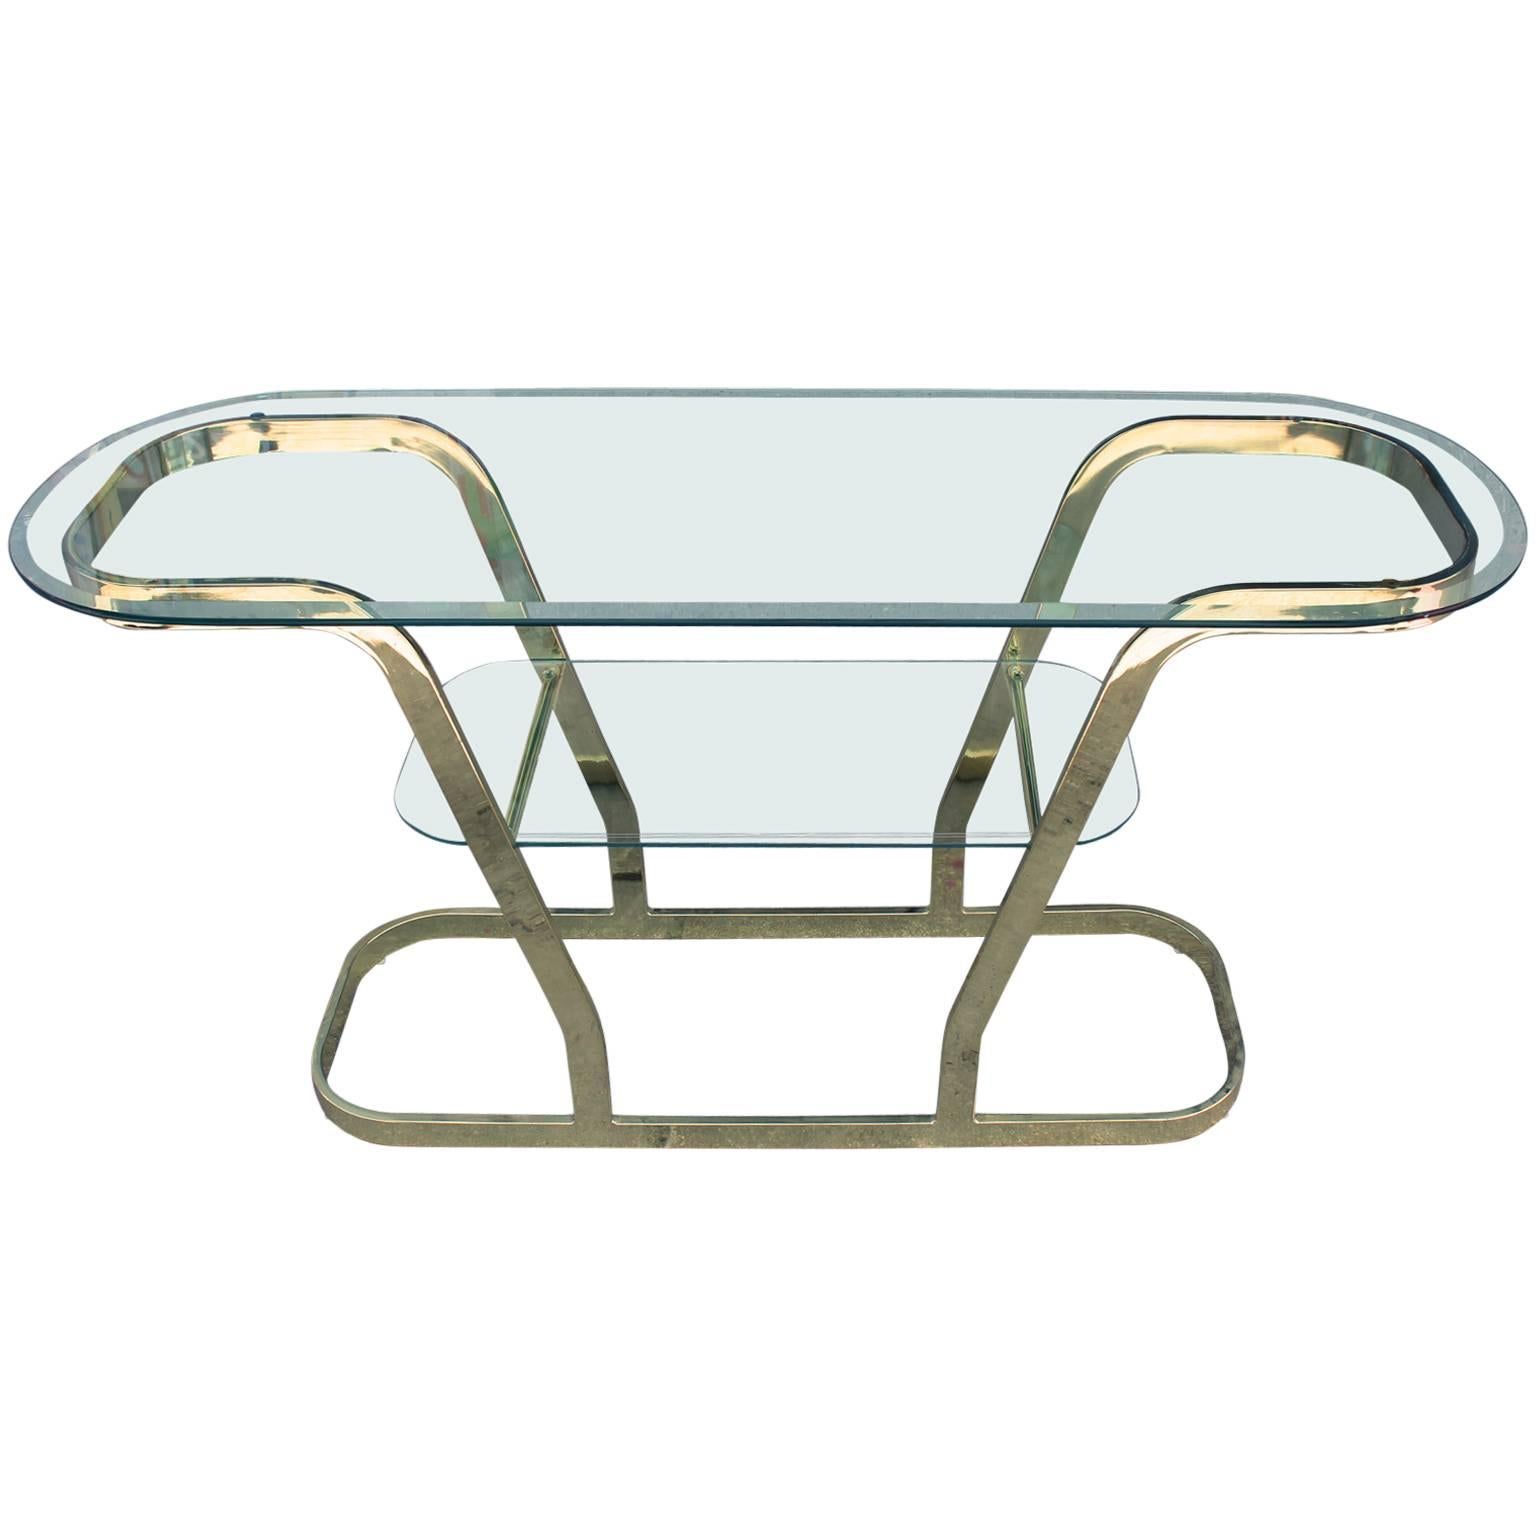 Glamorous Brass and Glass Two Tiered Oval Modern Console or Entry Table